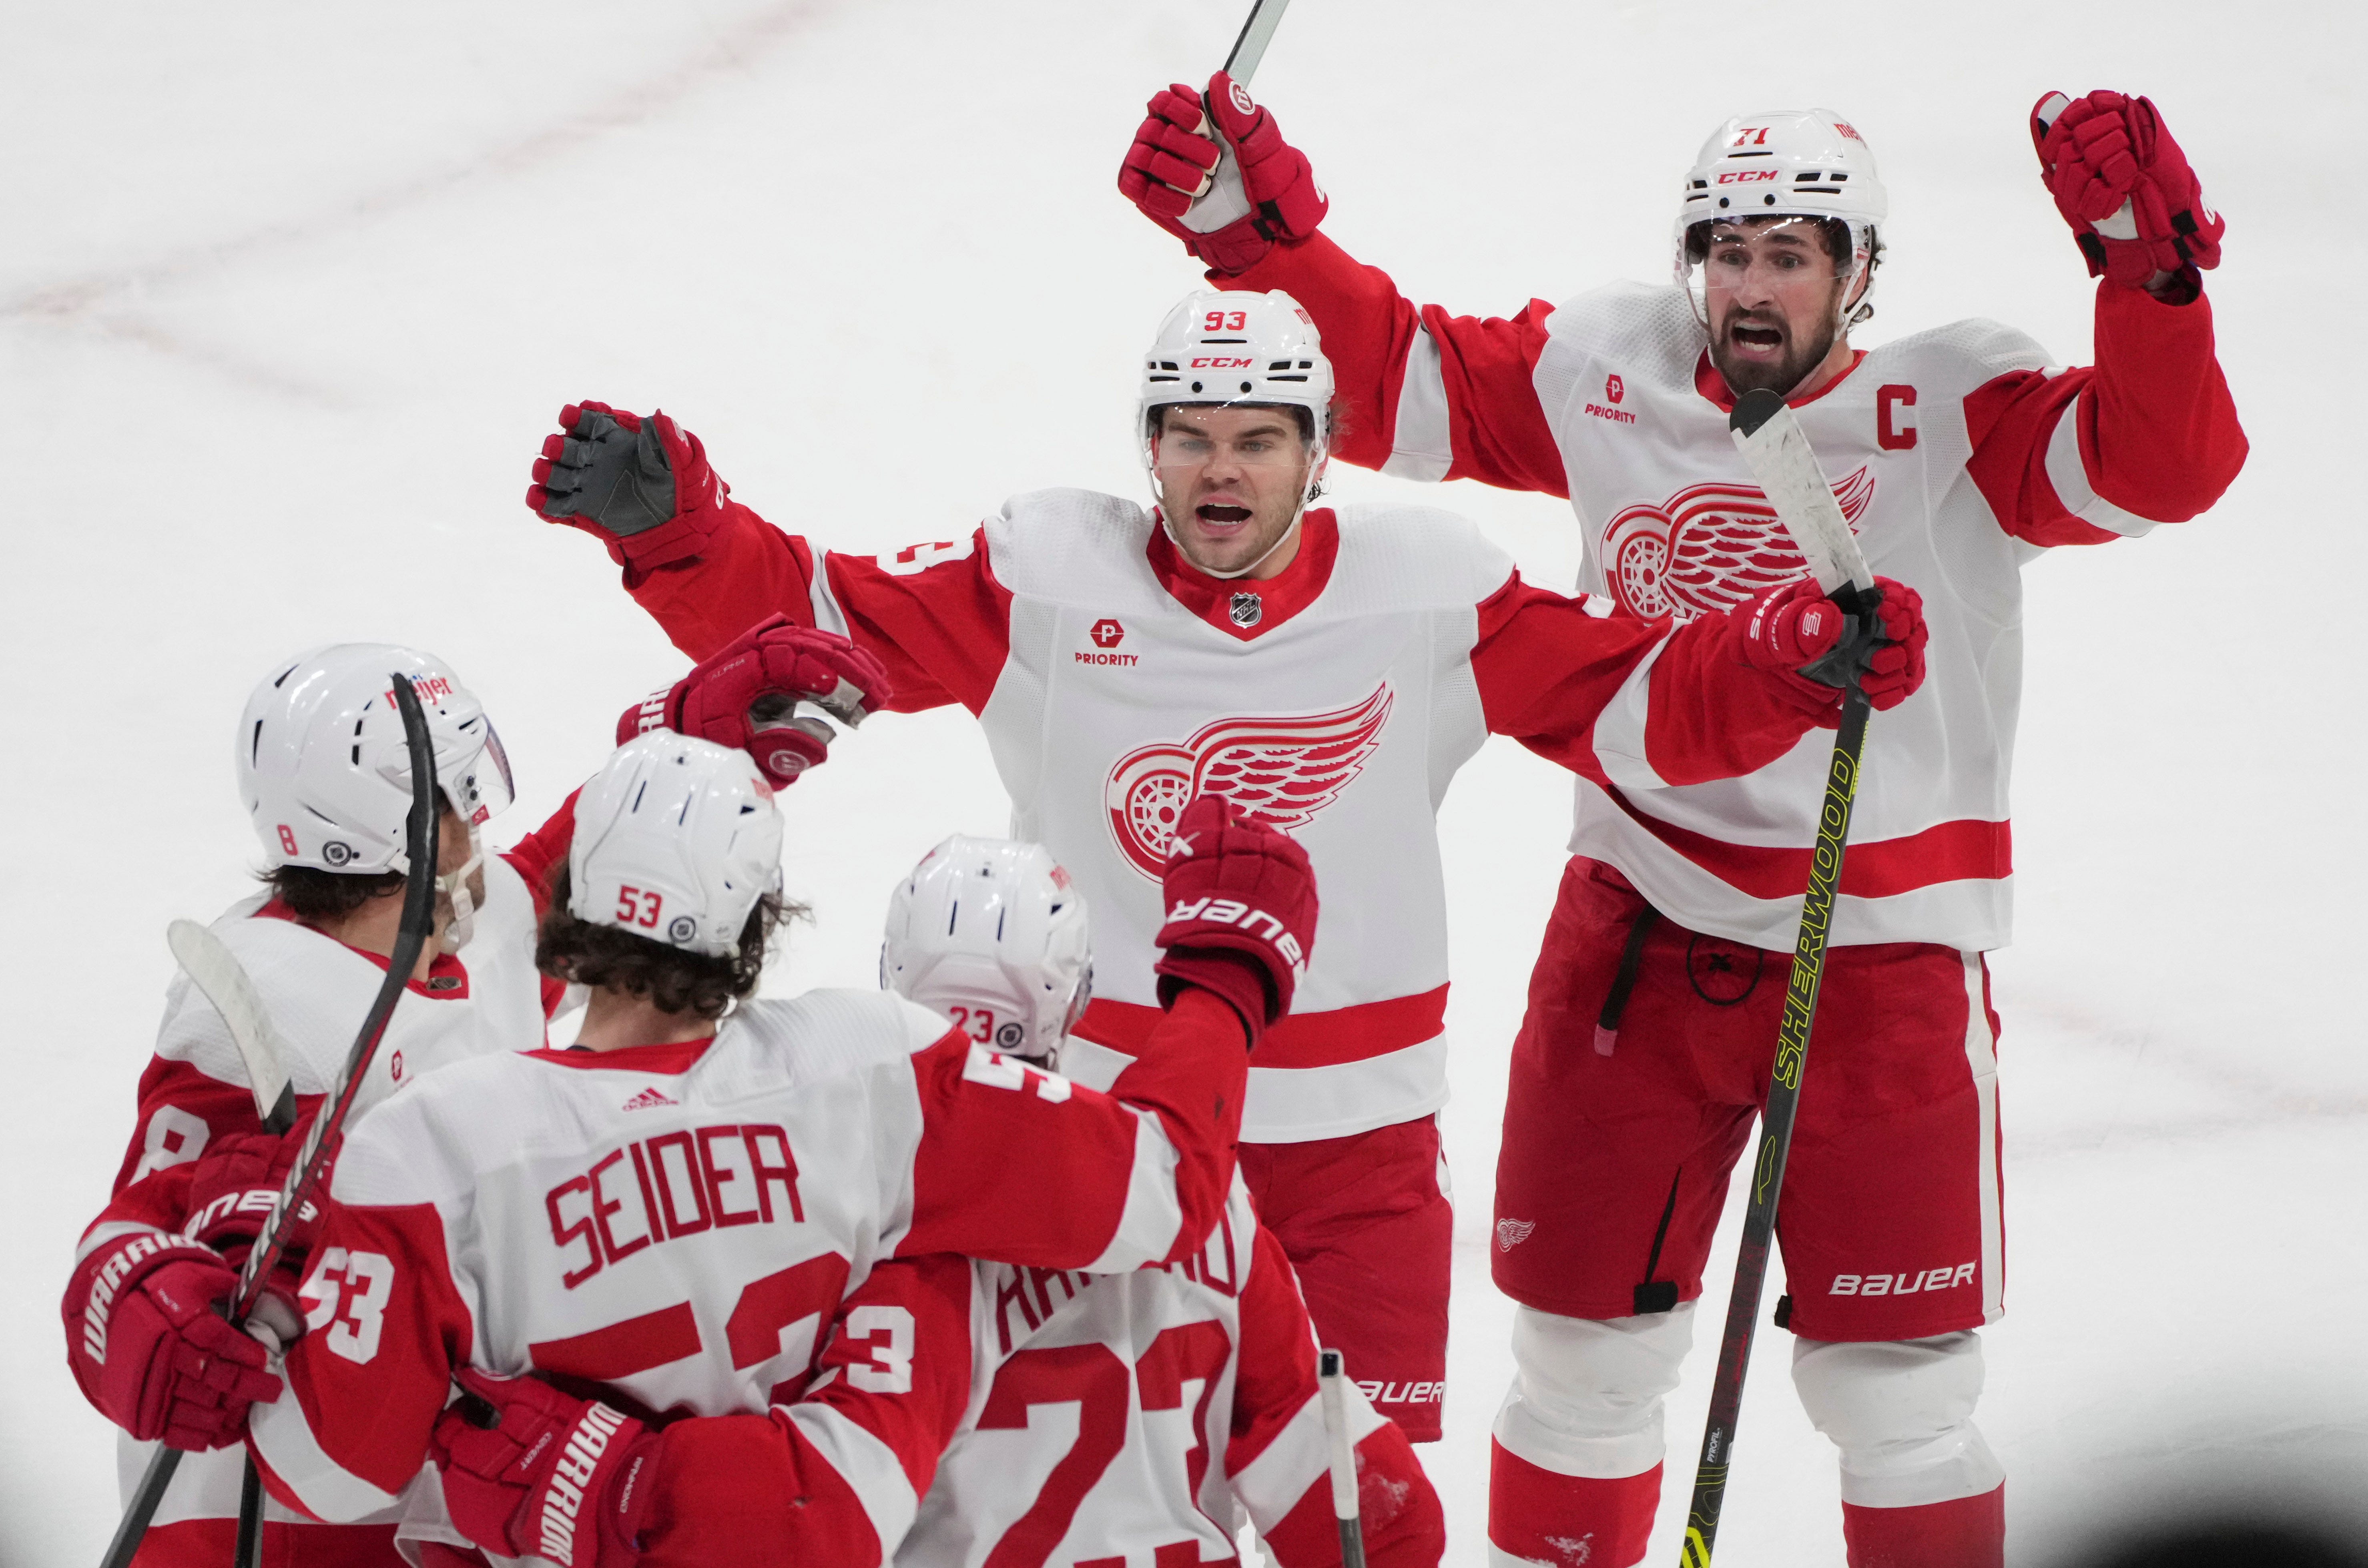 Detroit Red Wings' Moritz Seider (53) celebrates with teammates after his goal against the Montreal Canadiens during the first period.